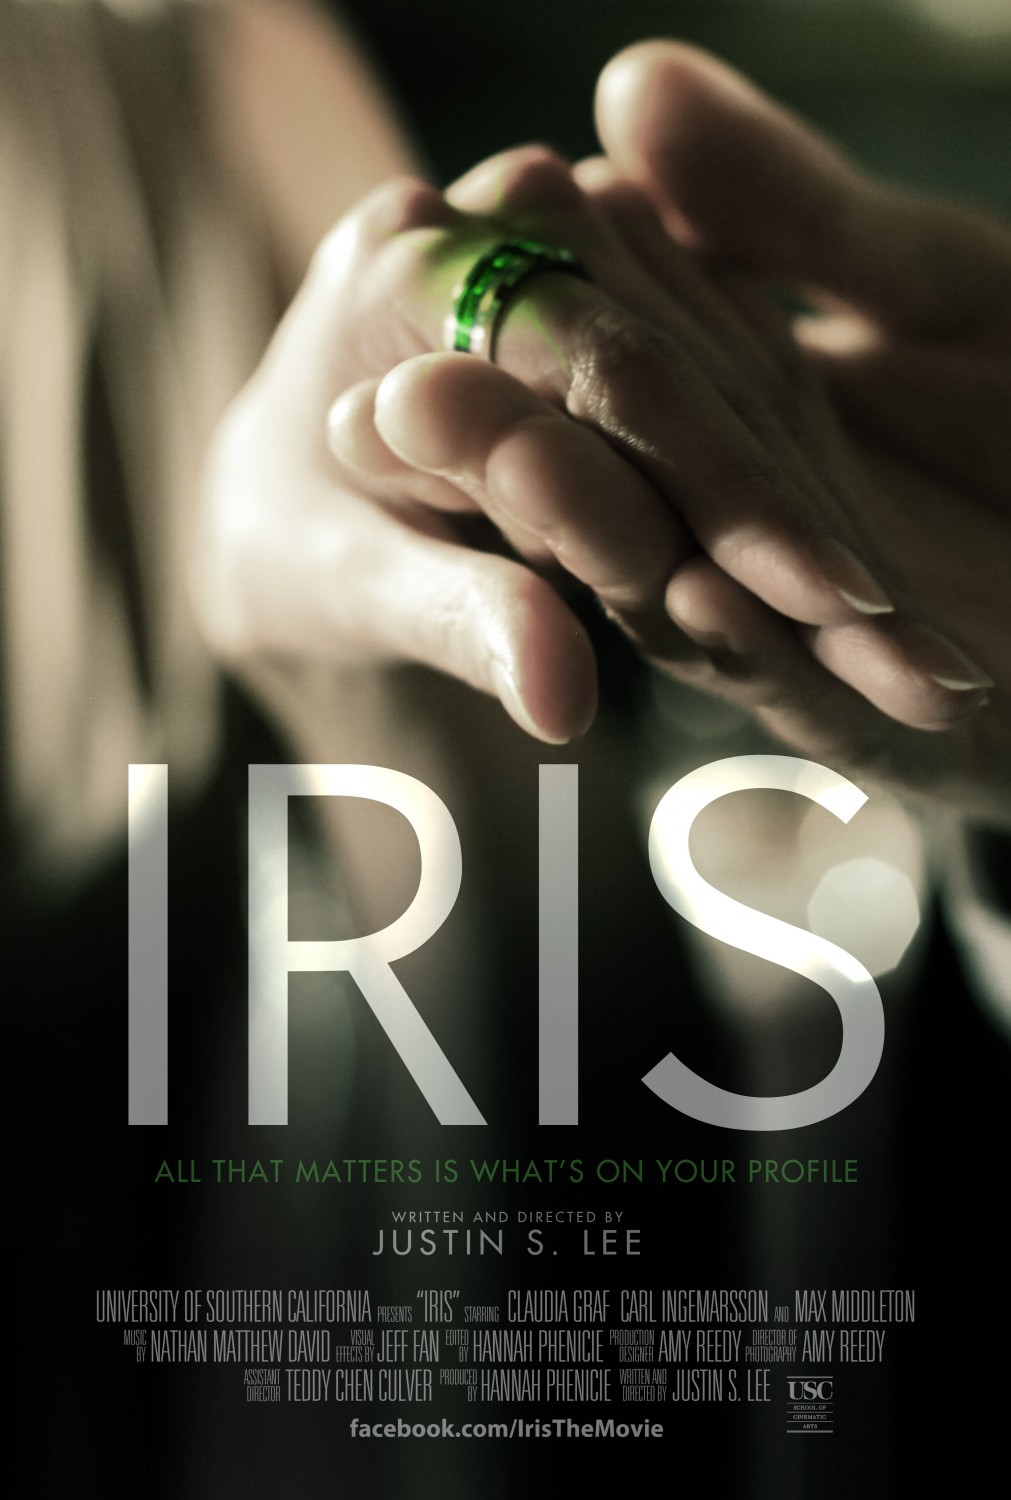 Extra Large Movie Poster Image for Iris